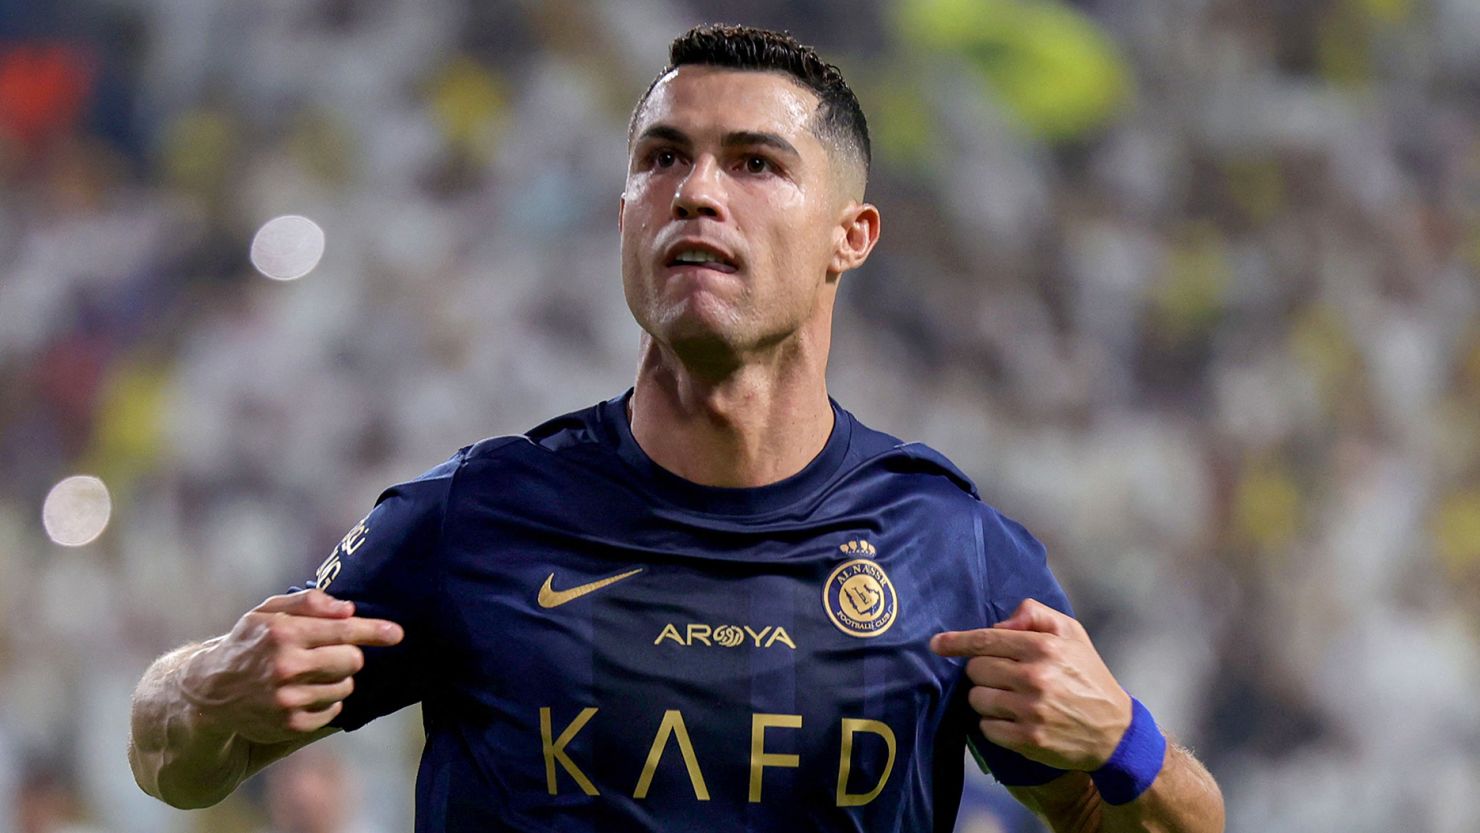 Ronaldo has been ranked as the world's highest-paid athlete by Forbes for the fourth time.